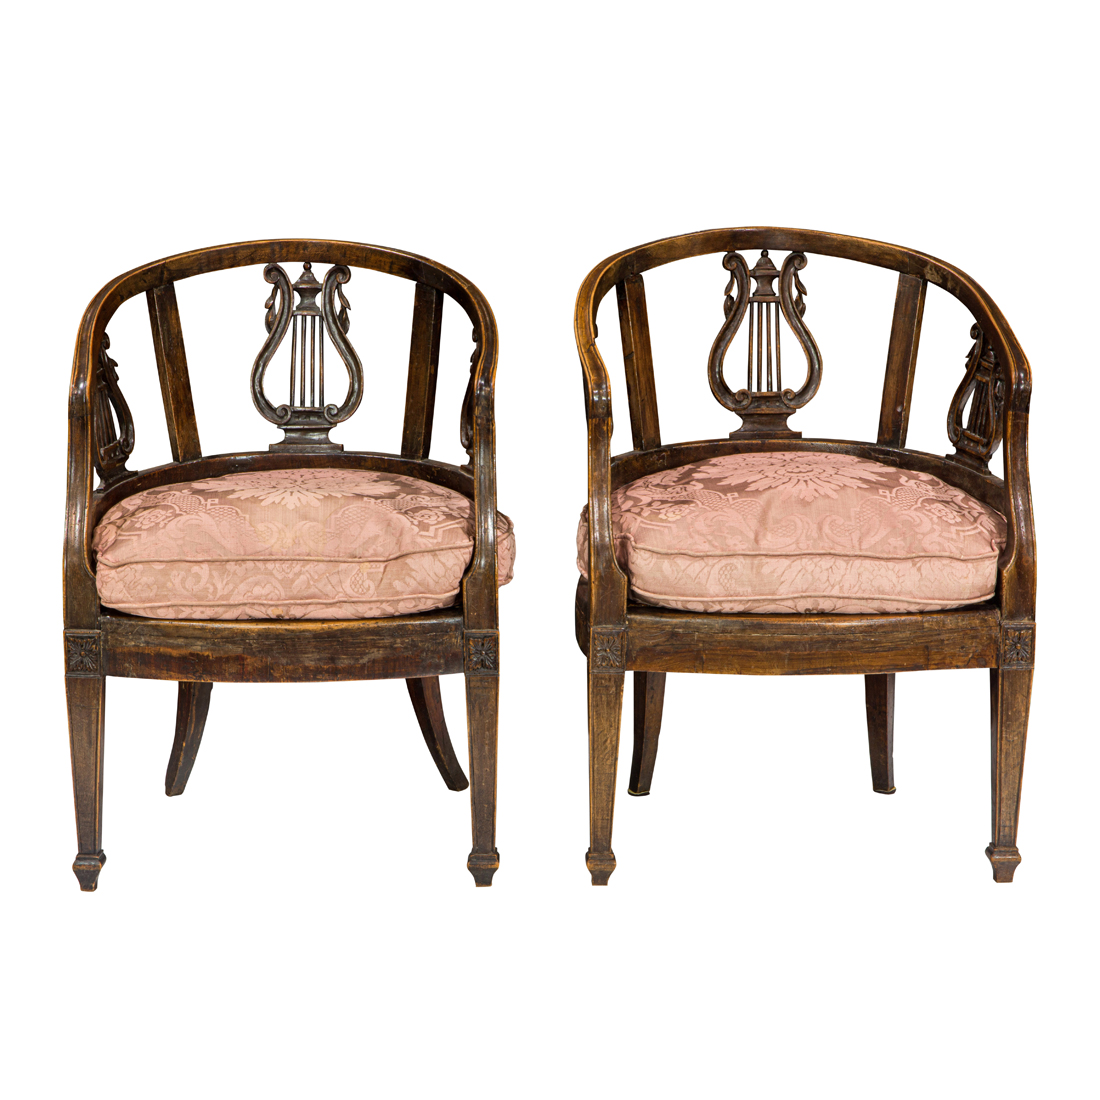 A PAIR OF ITALIAN TUB CHAIRS A 3a0eed